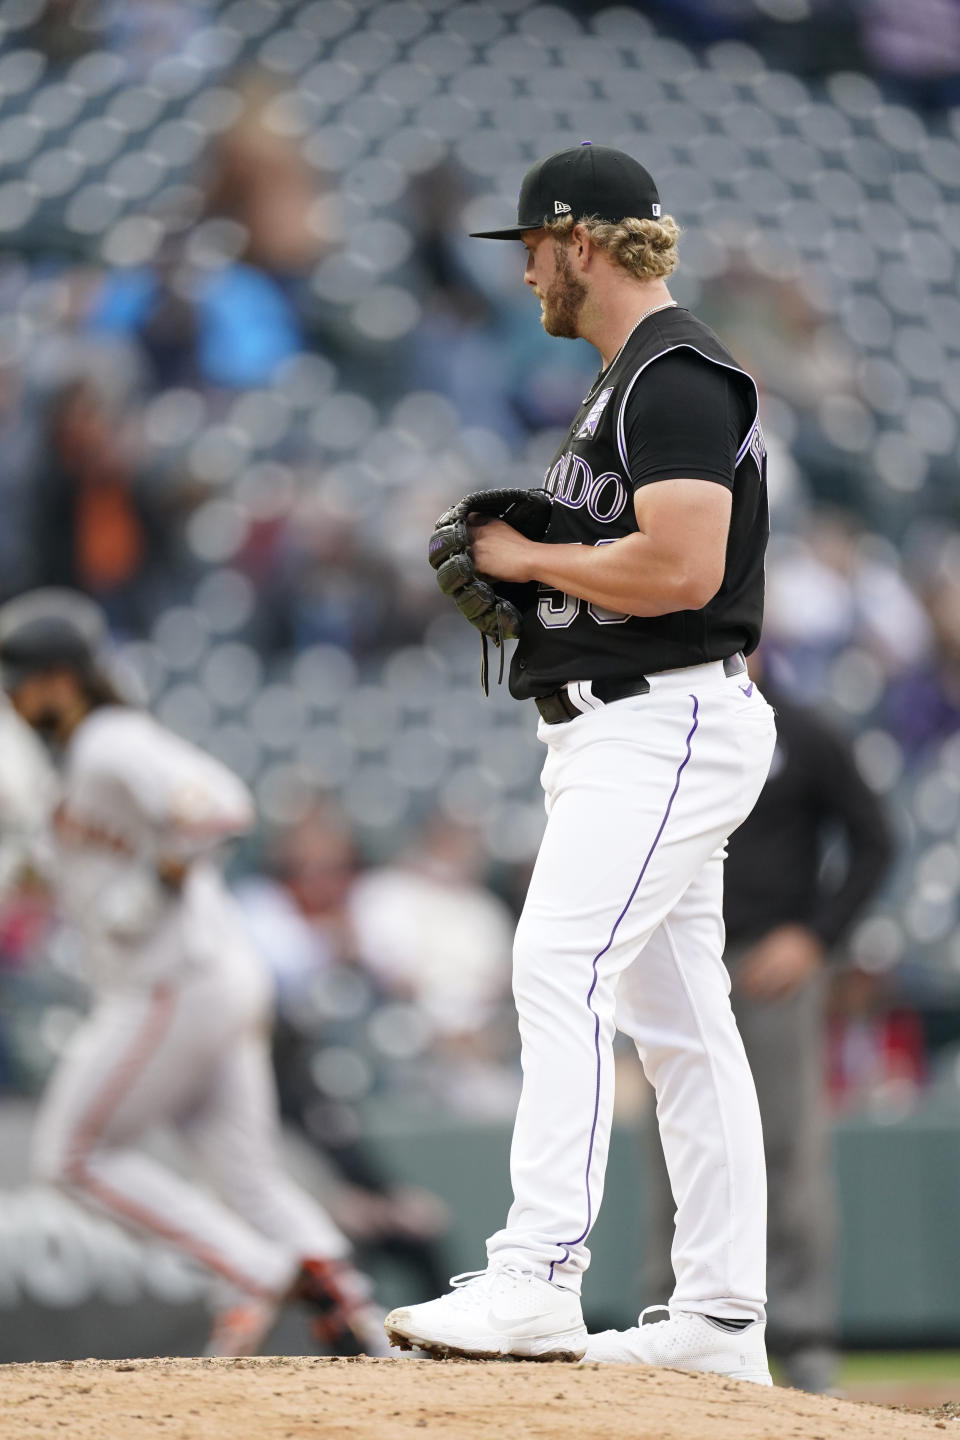 Colorado Rockies relief pitcher Lucas Gilbreath, front, looks on as San Francisco Giants' Brandon Crawford circles the bases after hitting a two-run home run in the sixth inning of game one of a baseball doubleheader Tuesday, May 4, 2021, in Denver. (AP Photo/David Zalubowski)